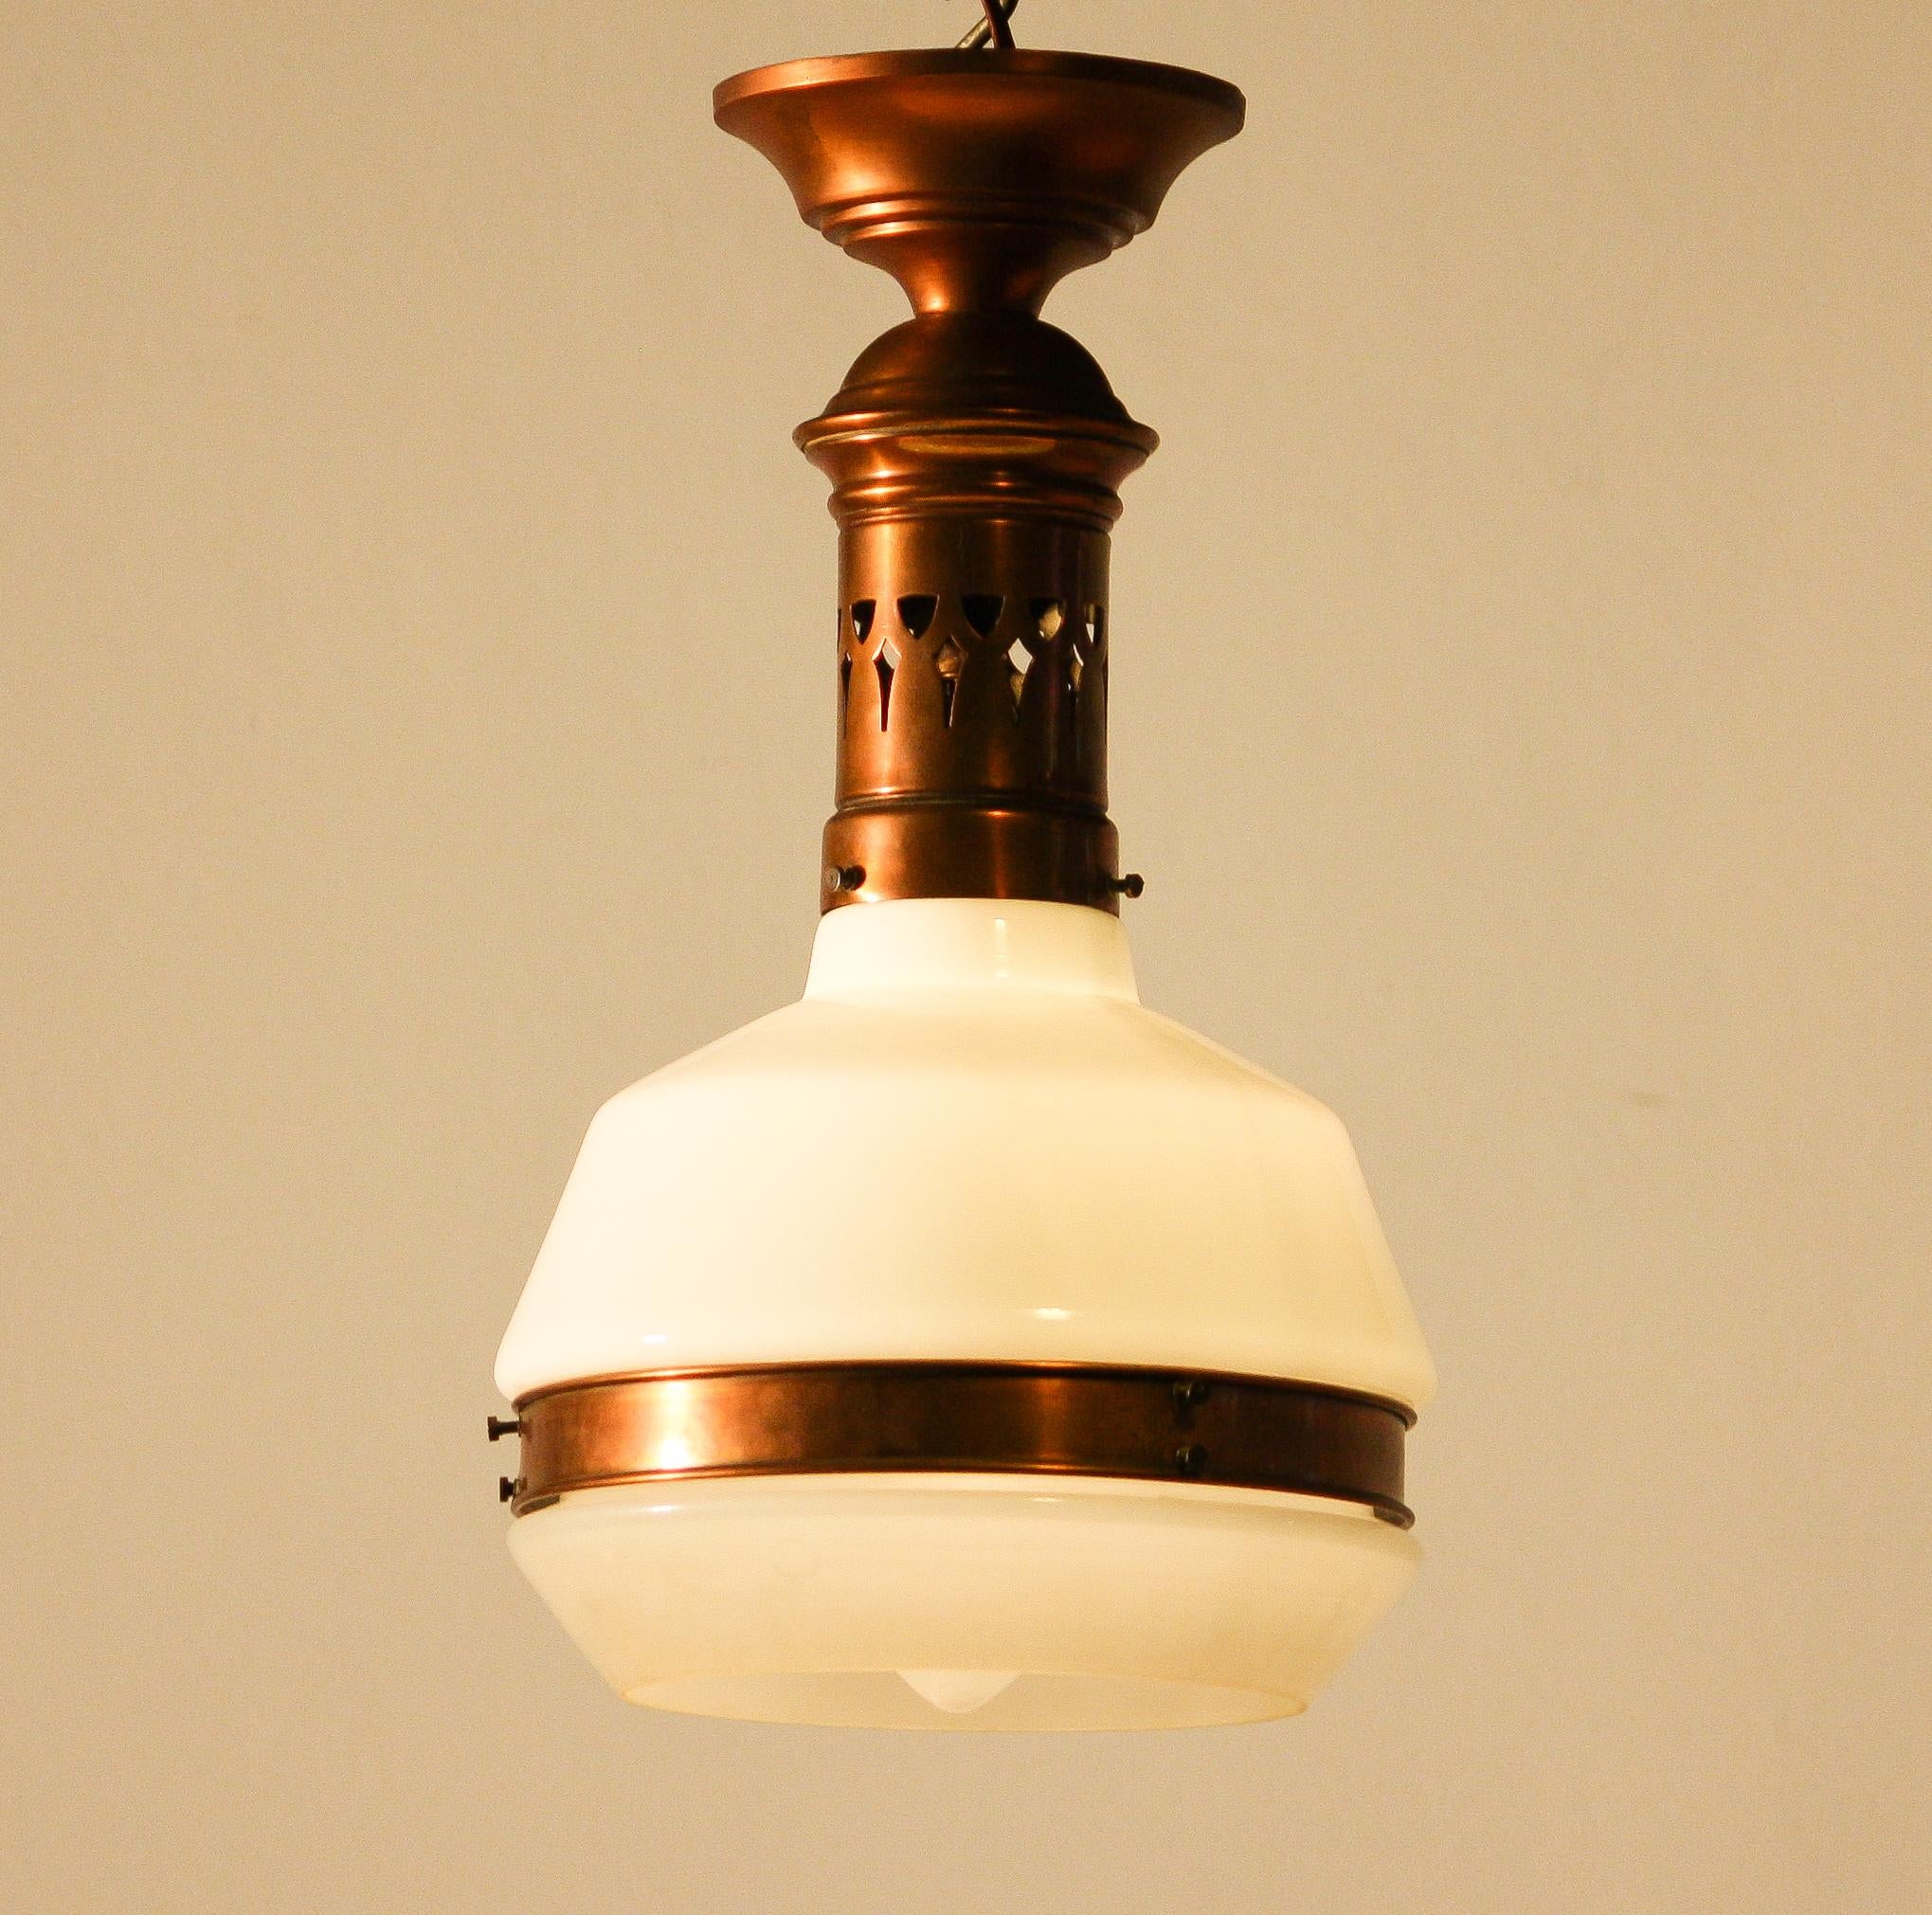 Beautiful Art Deco red copper pendant lamp with white satin finish glass hood.
In absolutely perfect condition.

